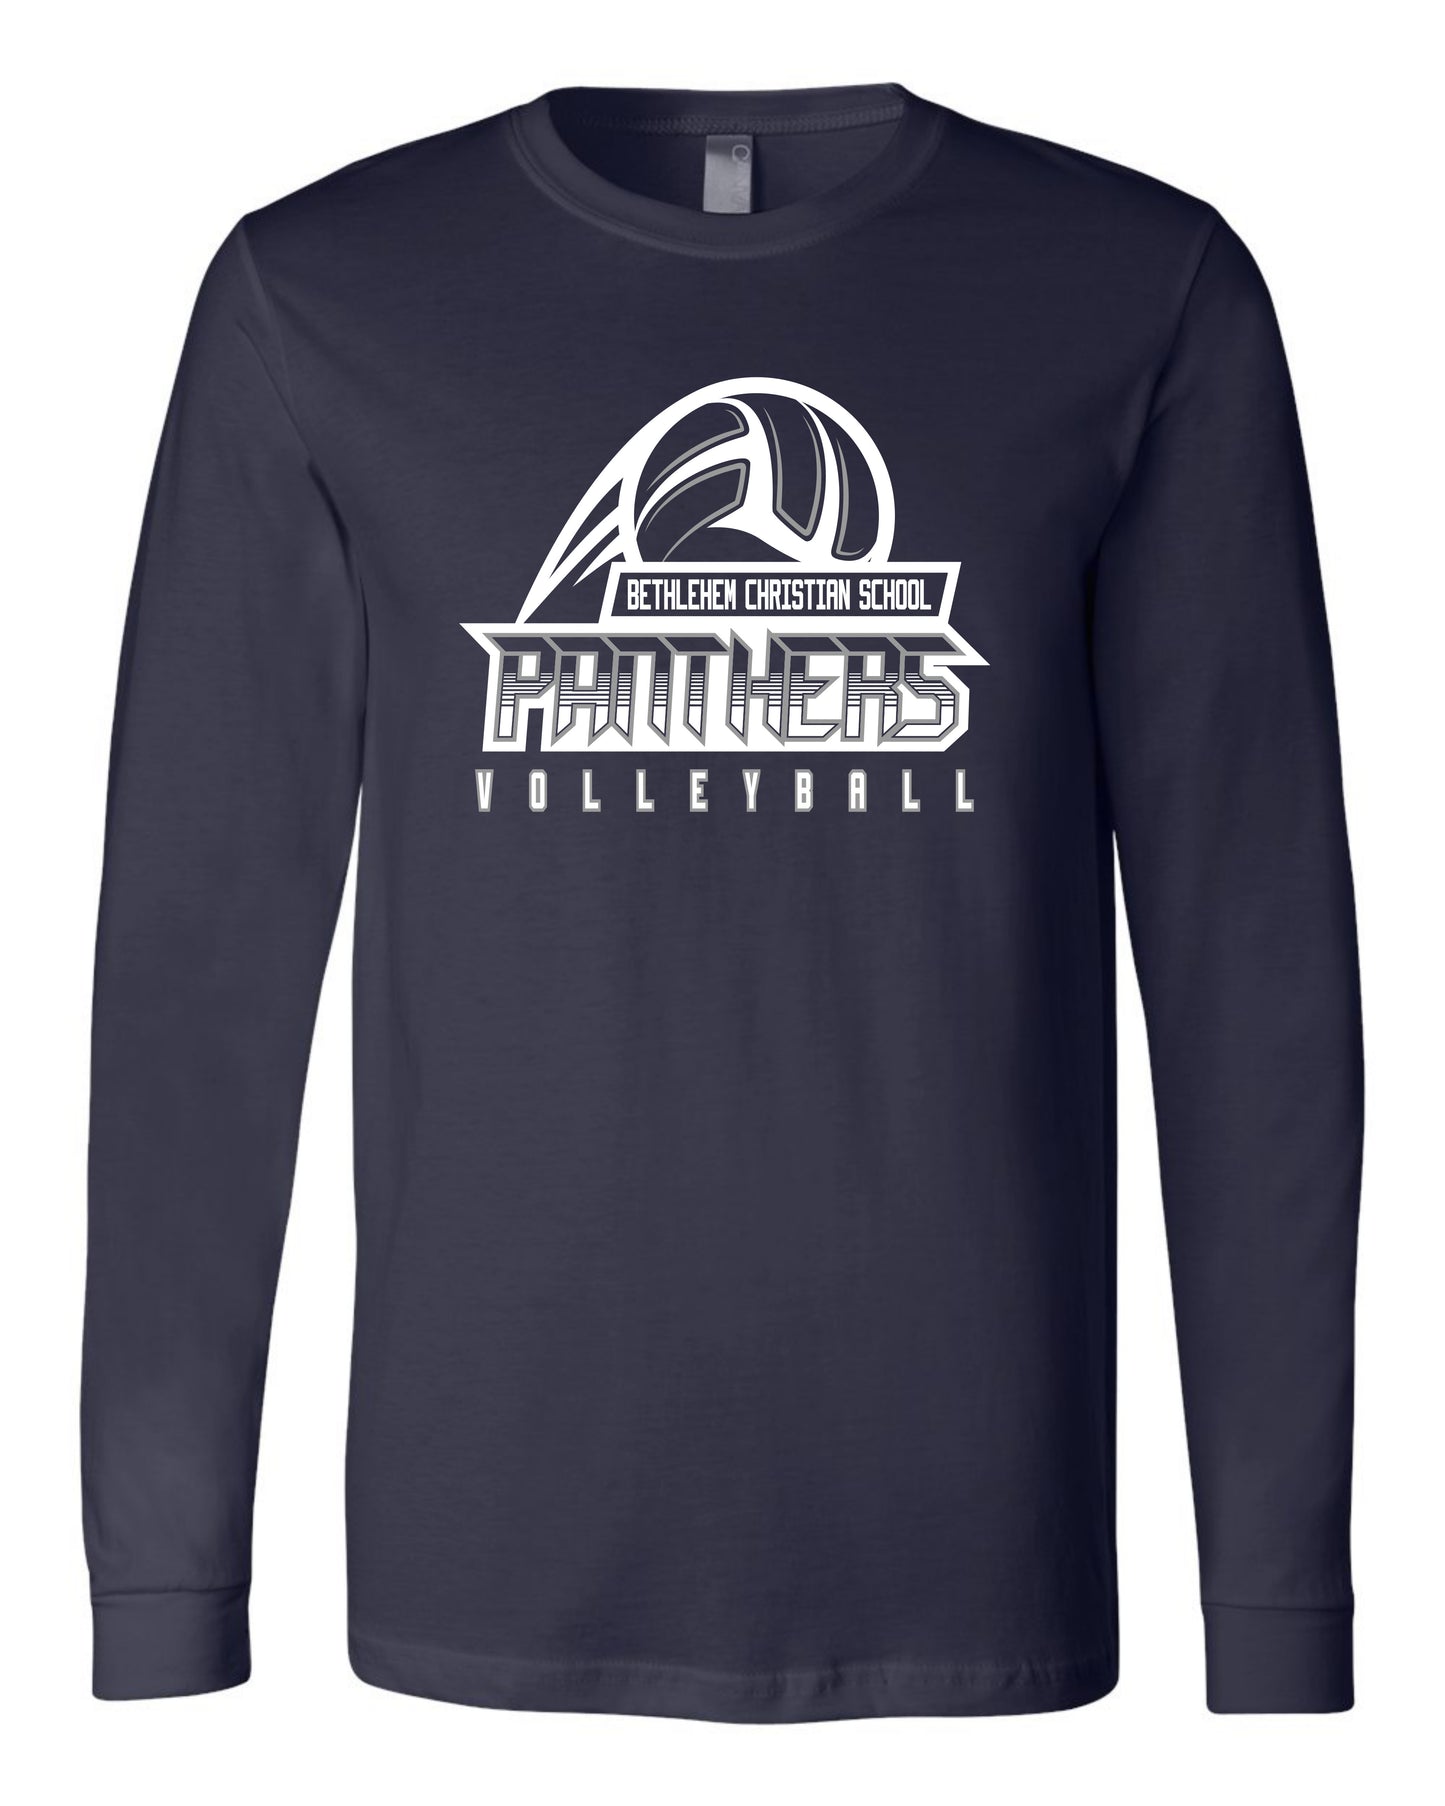 BCS Panthers Volleyball - Youth Long Sleeve